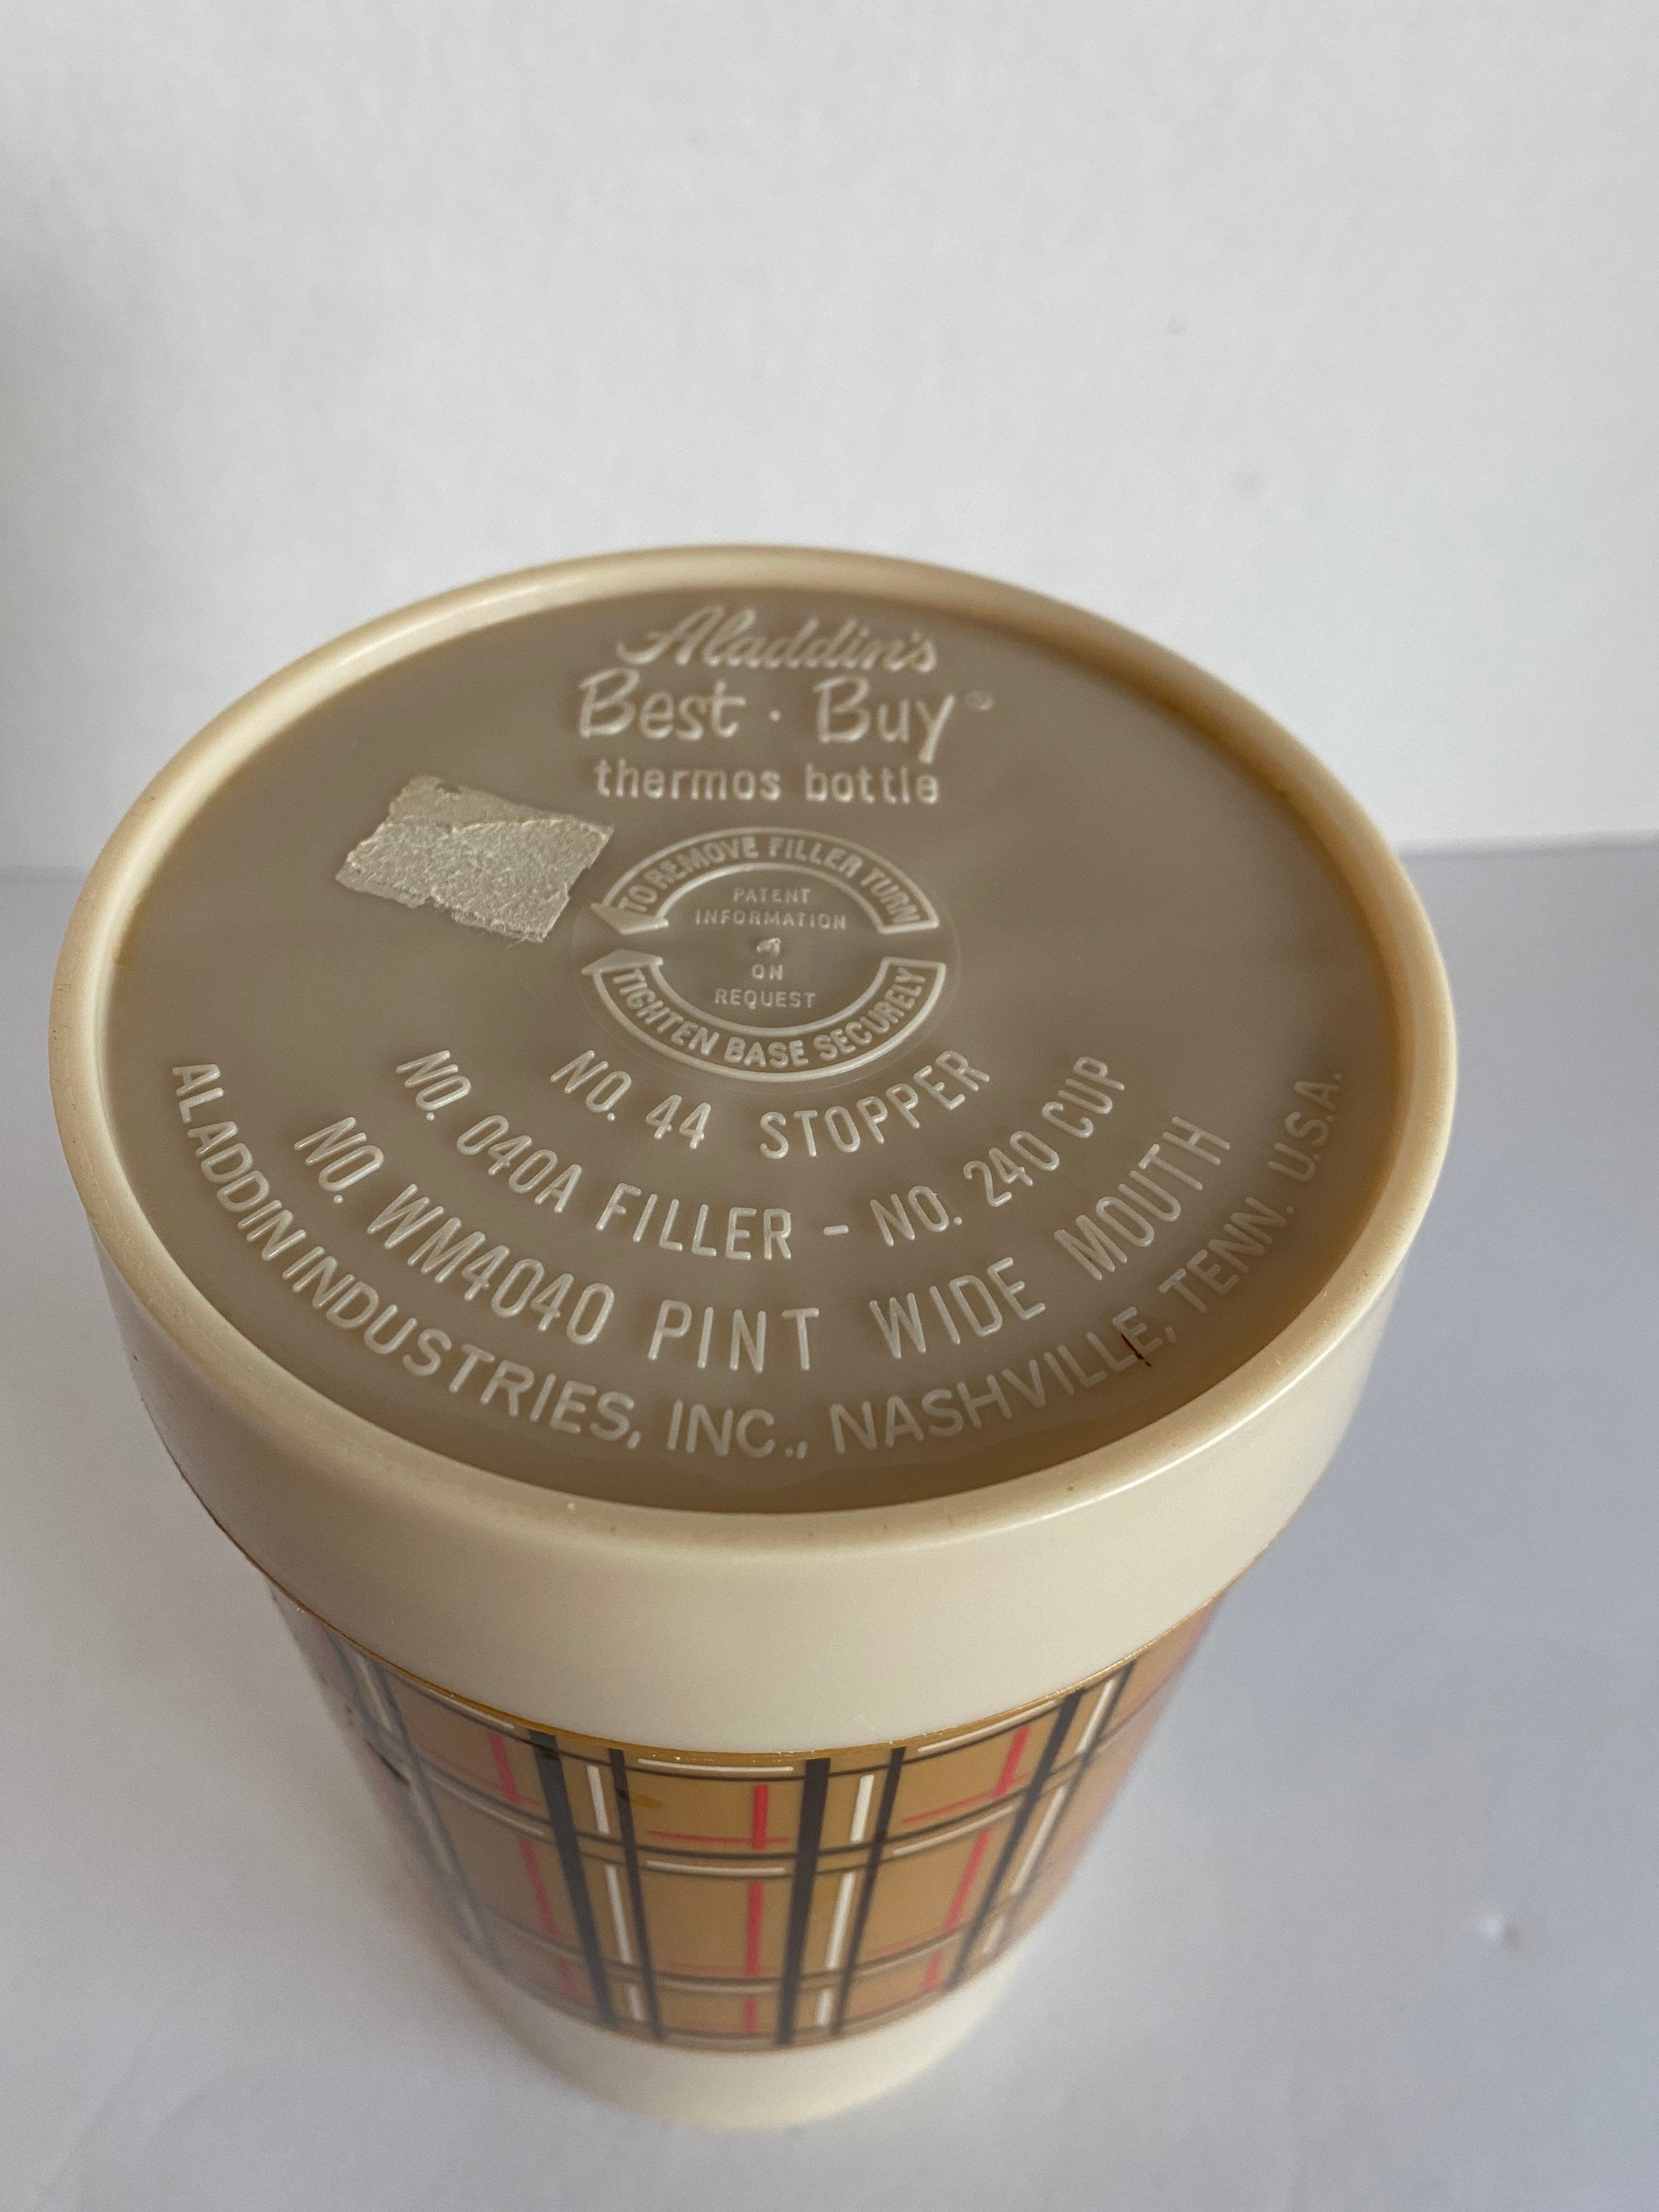 A Vintage Aladdin Best Buy Soup Thermos Vacuum Bottle All Original and  Complete & Ready to Use 